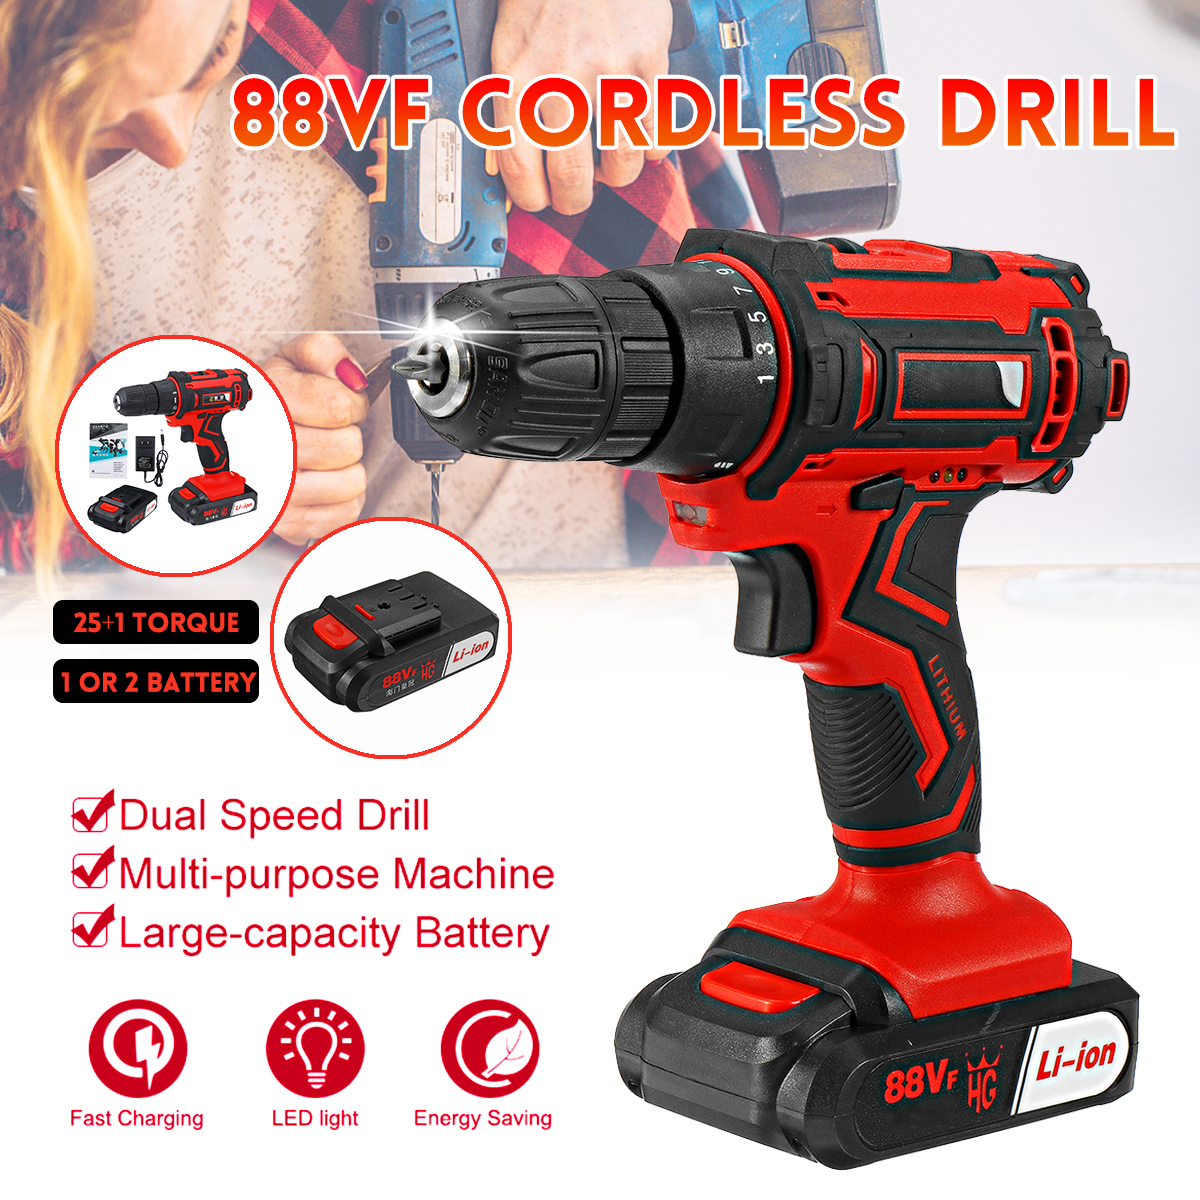 88VF 25+1 Gear Li-ion Battery Electric Drill 2 Speed Cordless Power Drill Drilling Tool 1 Or 2 Batteries 10mm Chuck